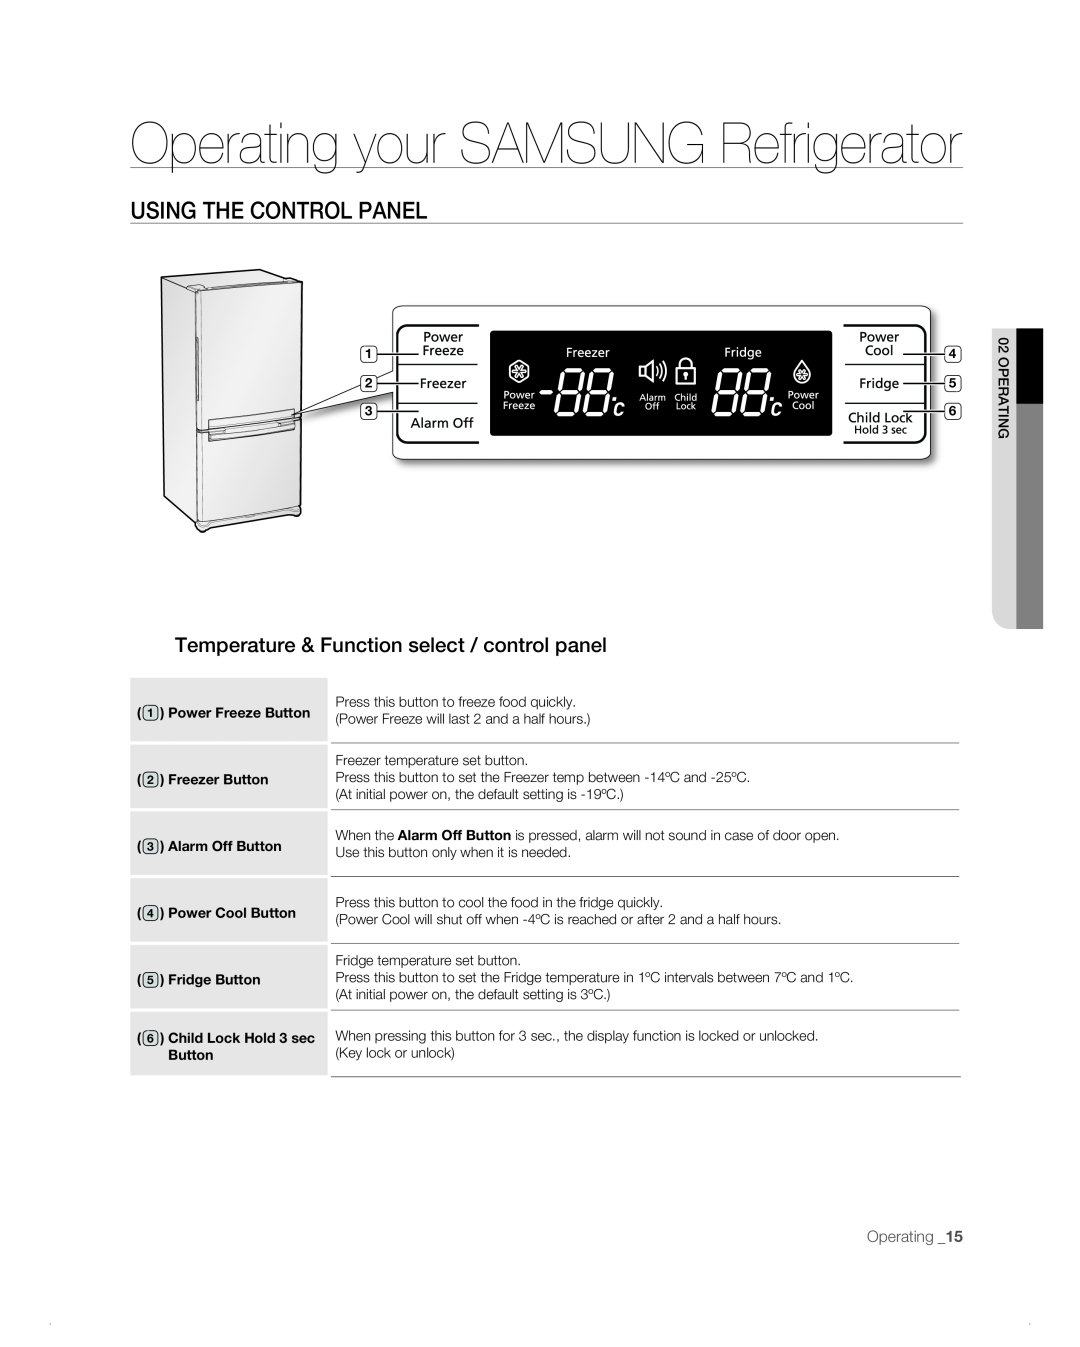 Samsung RB194AB, RB216AB, RB1AB, RB214AB, RB196AB Using the control panel, Operating your SAMSUNG Refrigerator, Operating _15 